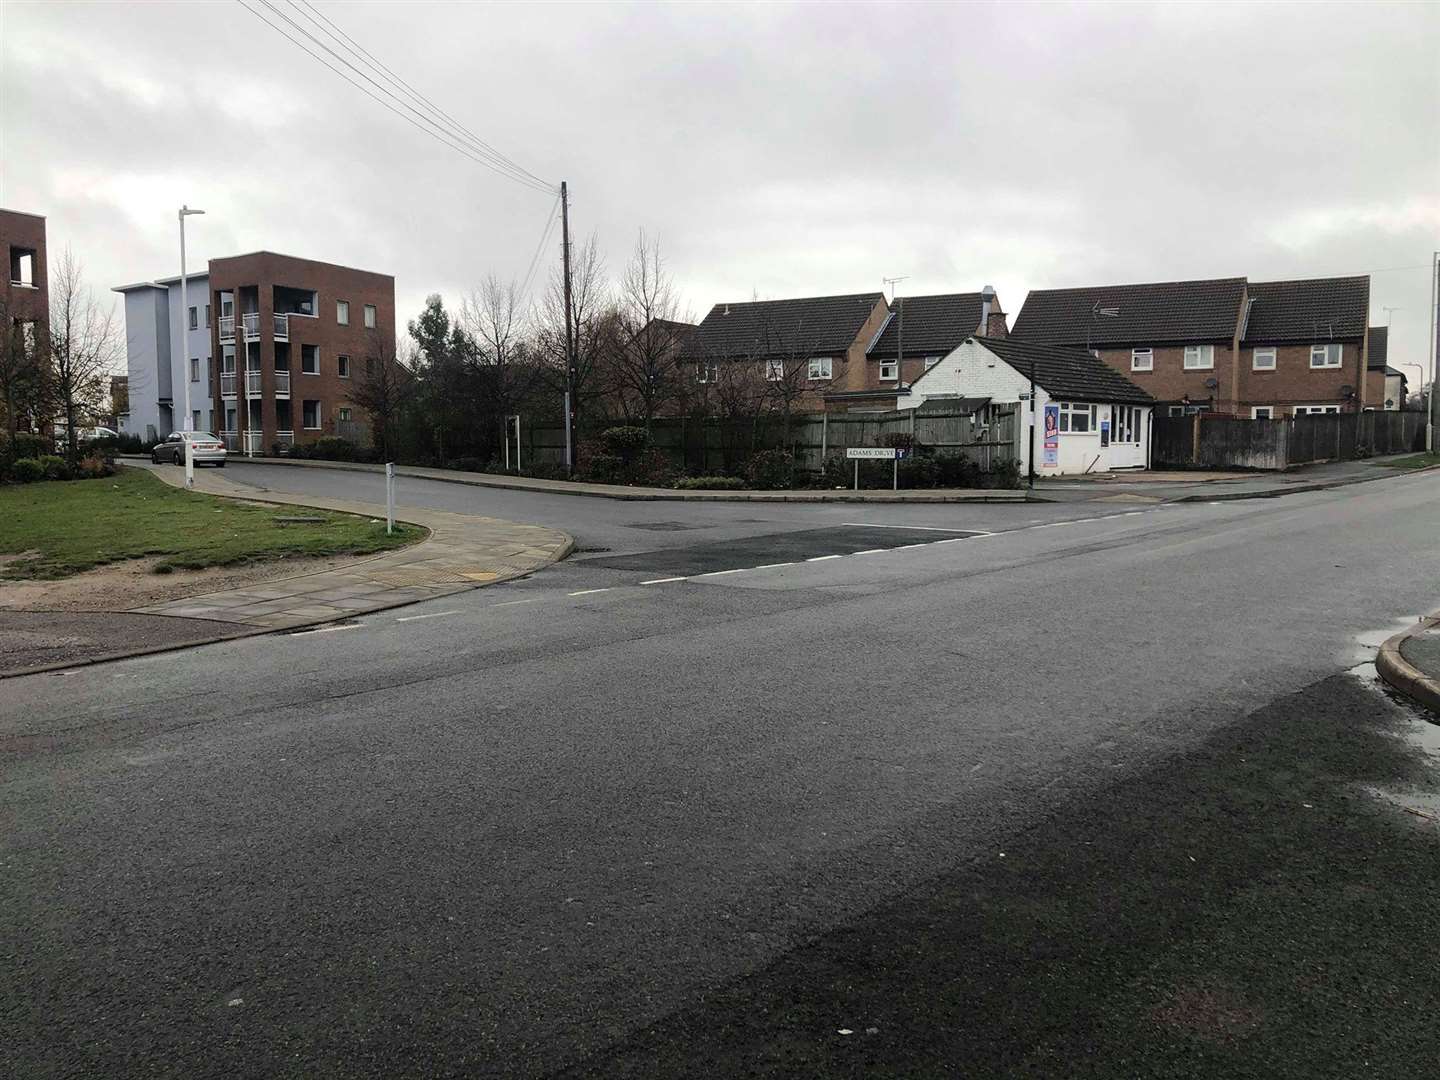 The incident happened at this junction with Adams Drive and Hunter Avenue in Willesborough